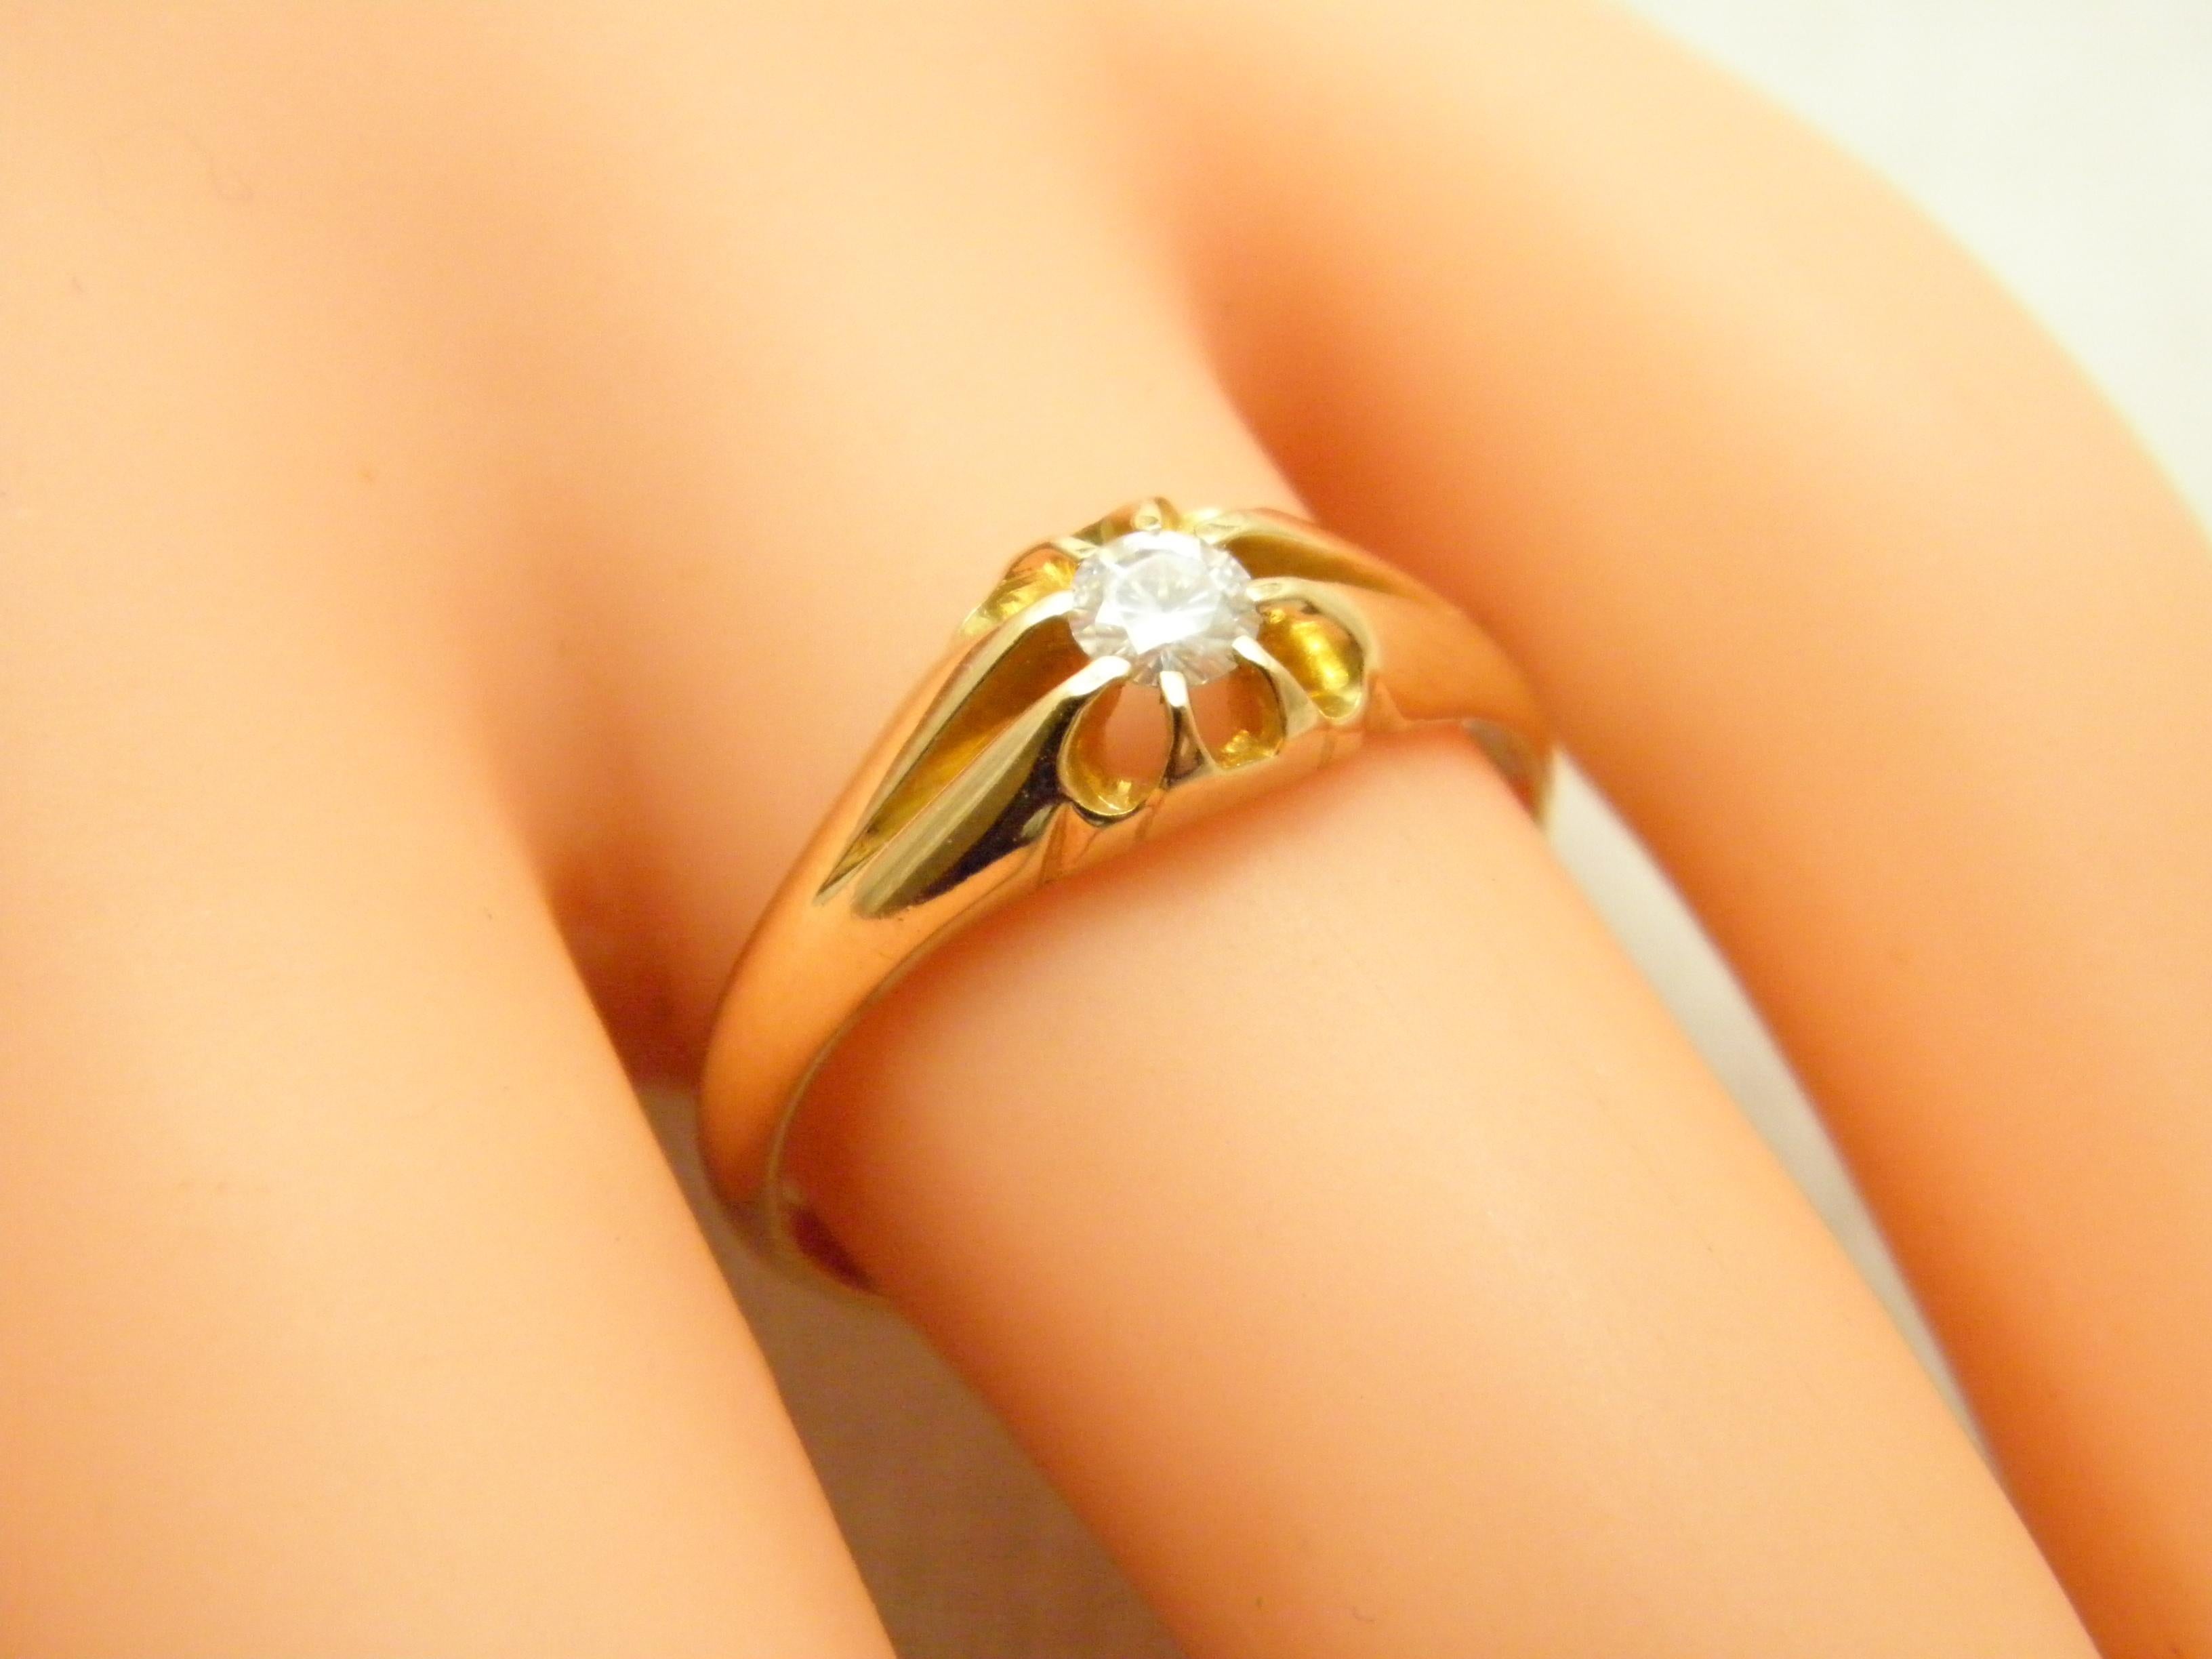 Antique 18ct Gold 0.33Cttw Diamond Solitaire Gypsy Ring Size N 6.75 750 Purity For Sale 1